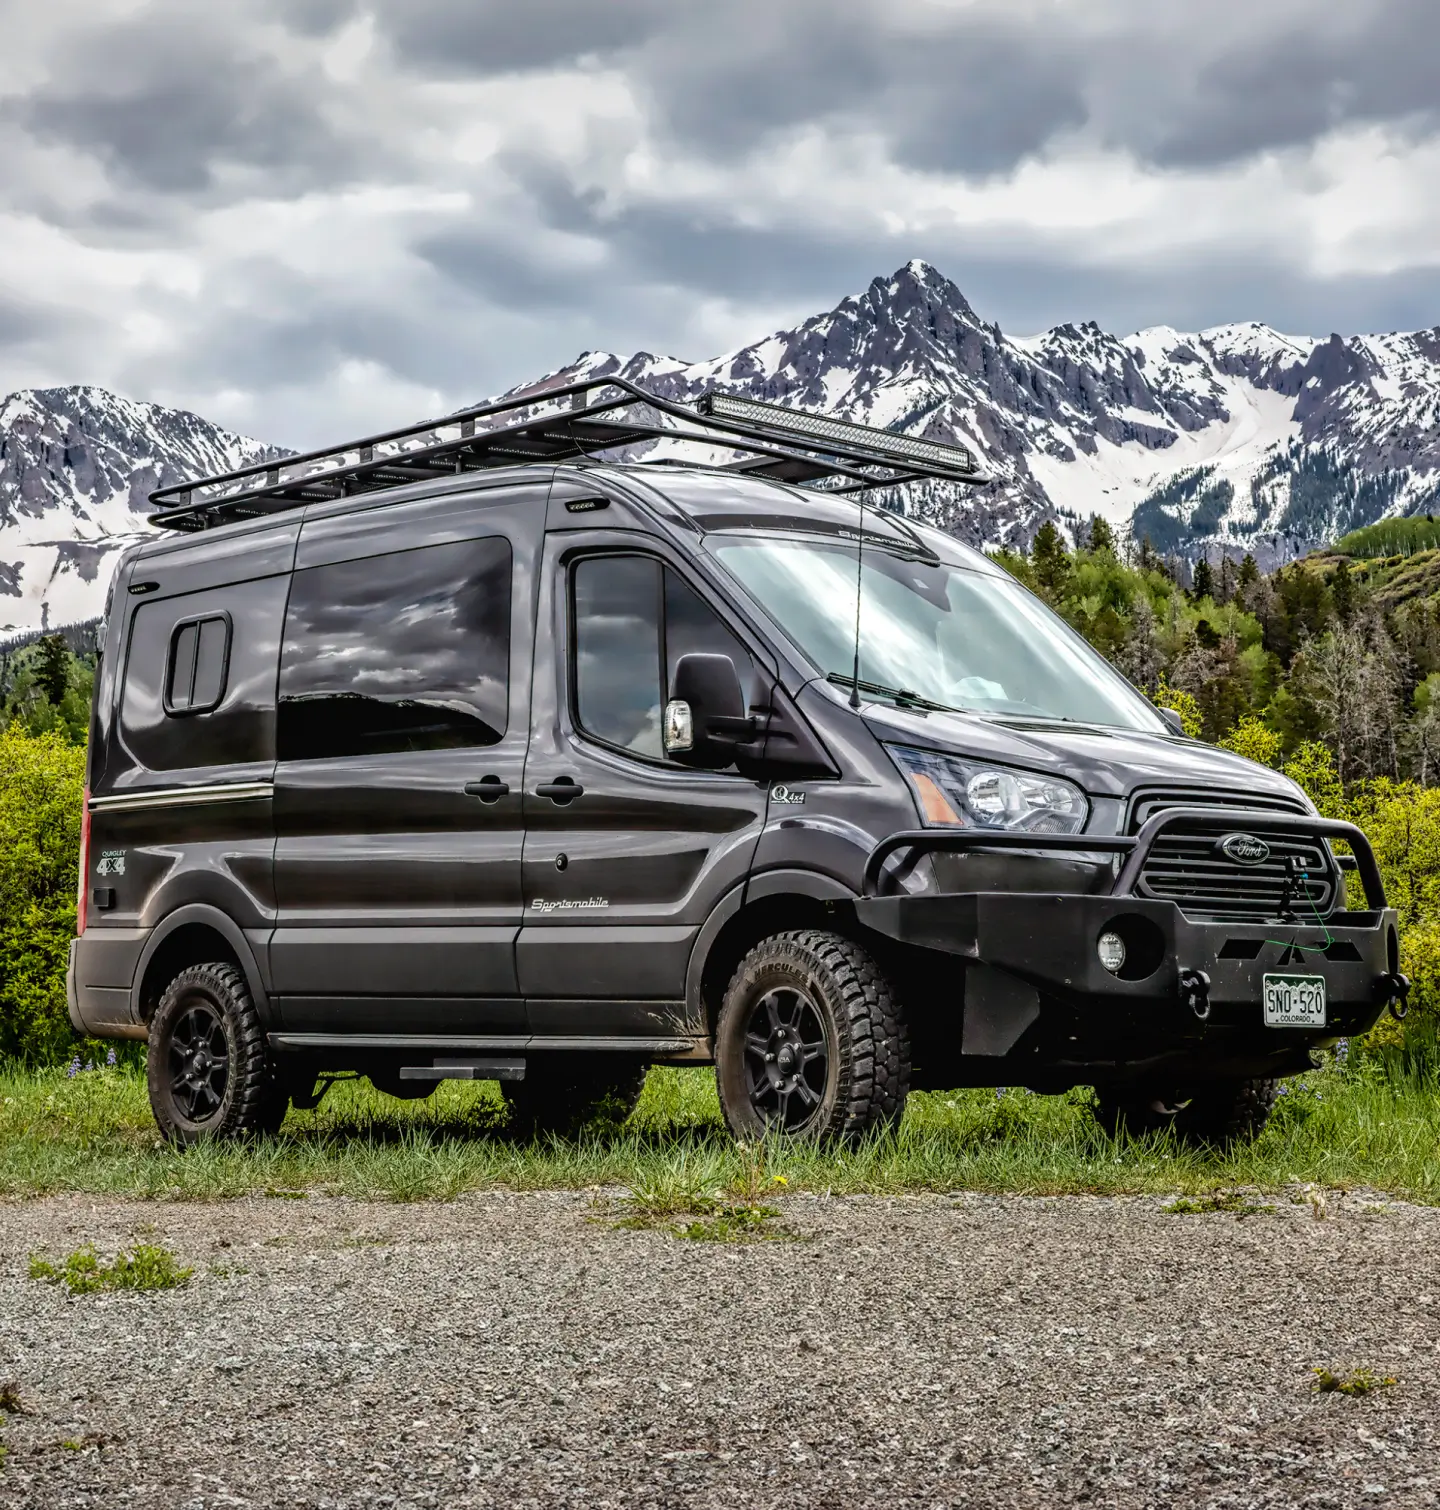 Black van parked in the field. Forest and mountains in the background.